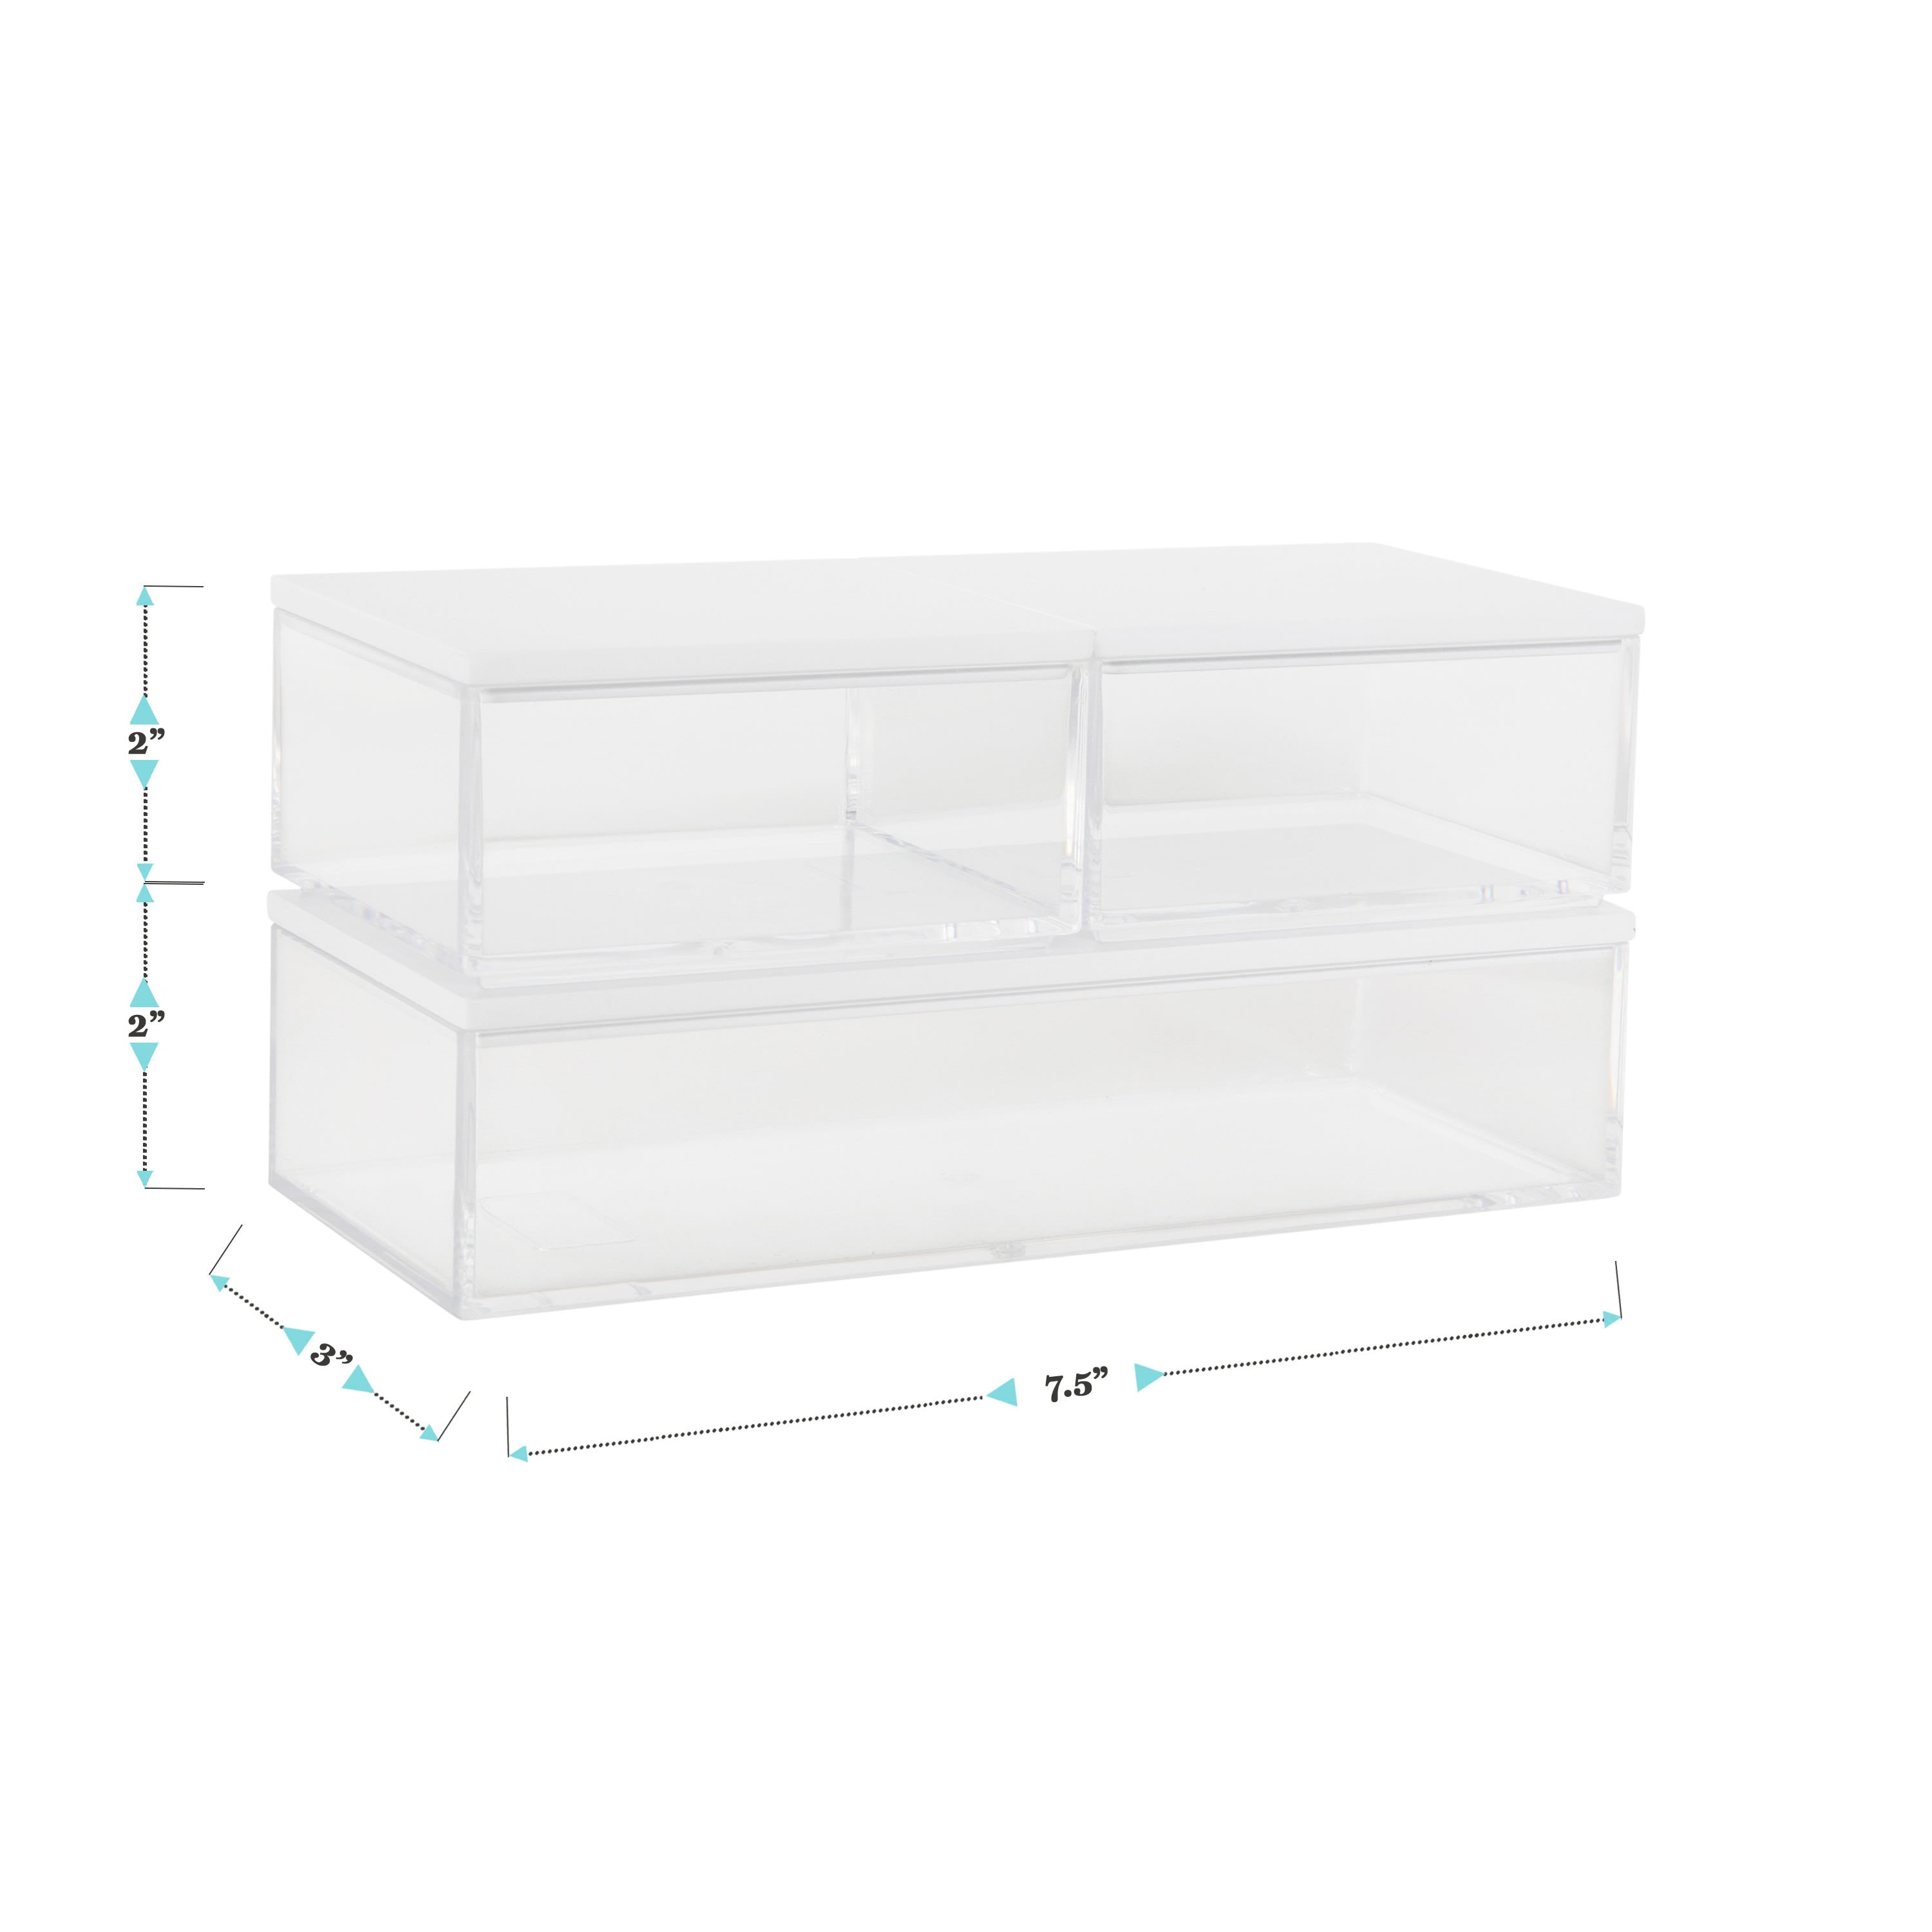 Brody Clear Plastic Storage Organizer Bins with Lids for Home Office, Kitchen, or Bathroom